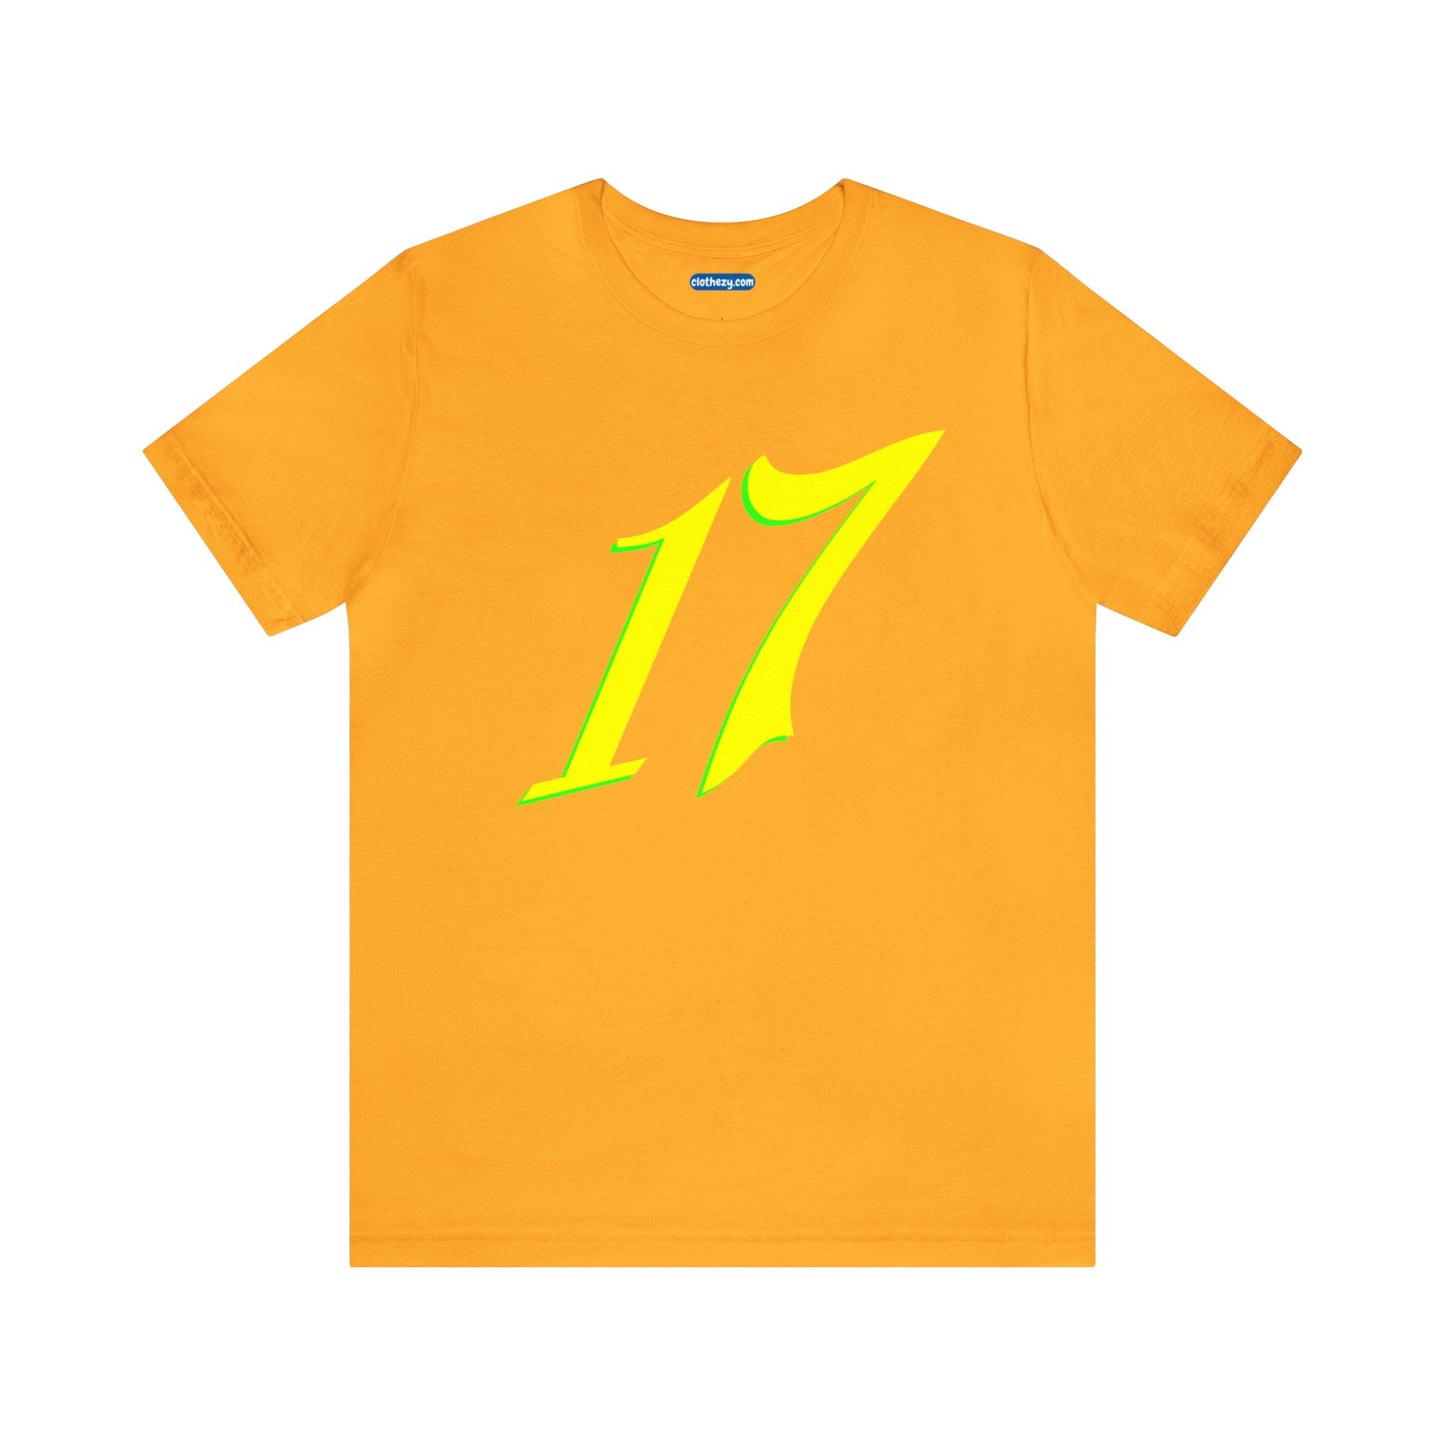 Number 17 Design - Soft Cotton Tee for birthdays and celebrations, Gift for friends and family, Multiple Options by clothezy.com in Green Heather Size Small - Buy Now